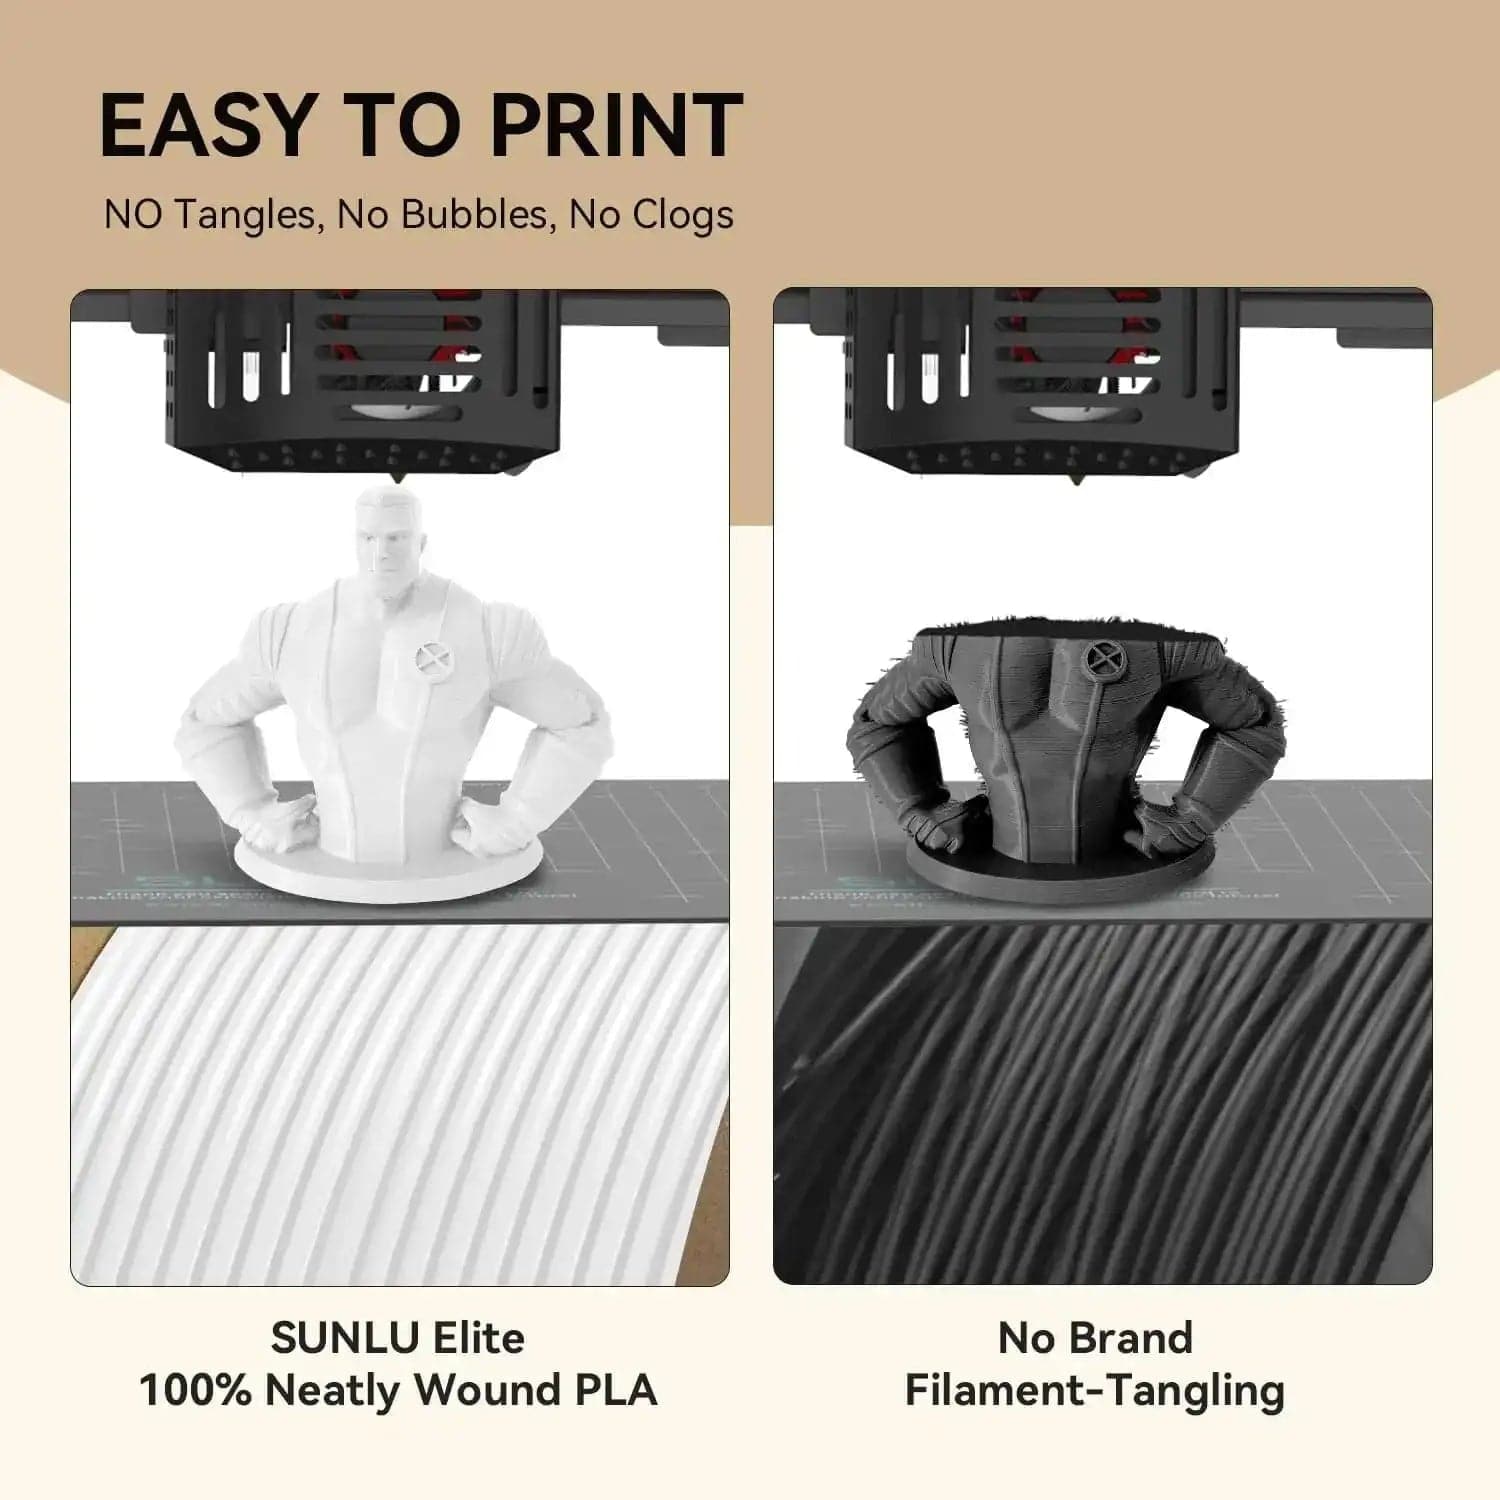 SUNLU Elite PLA 3D Printer Filament 1.75mm 1KG Spool (2.2lbs)
✅【Ship From Amazon】Same shipping service with Amazon. Enjoy reliable performance and fast shipping with the Amazon FBA Warehouse.
✅【SUNLU PLA Filament 1.75mm】DimensSUNLU Elite PLA 3D Printer Filament 13D Printing Materials